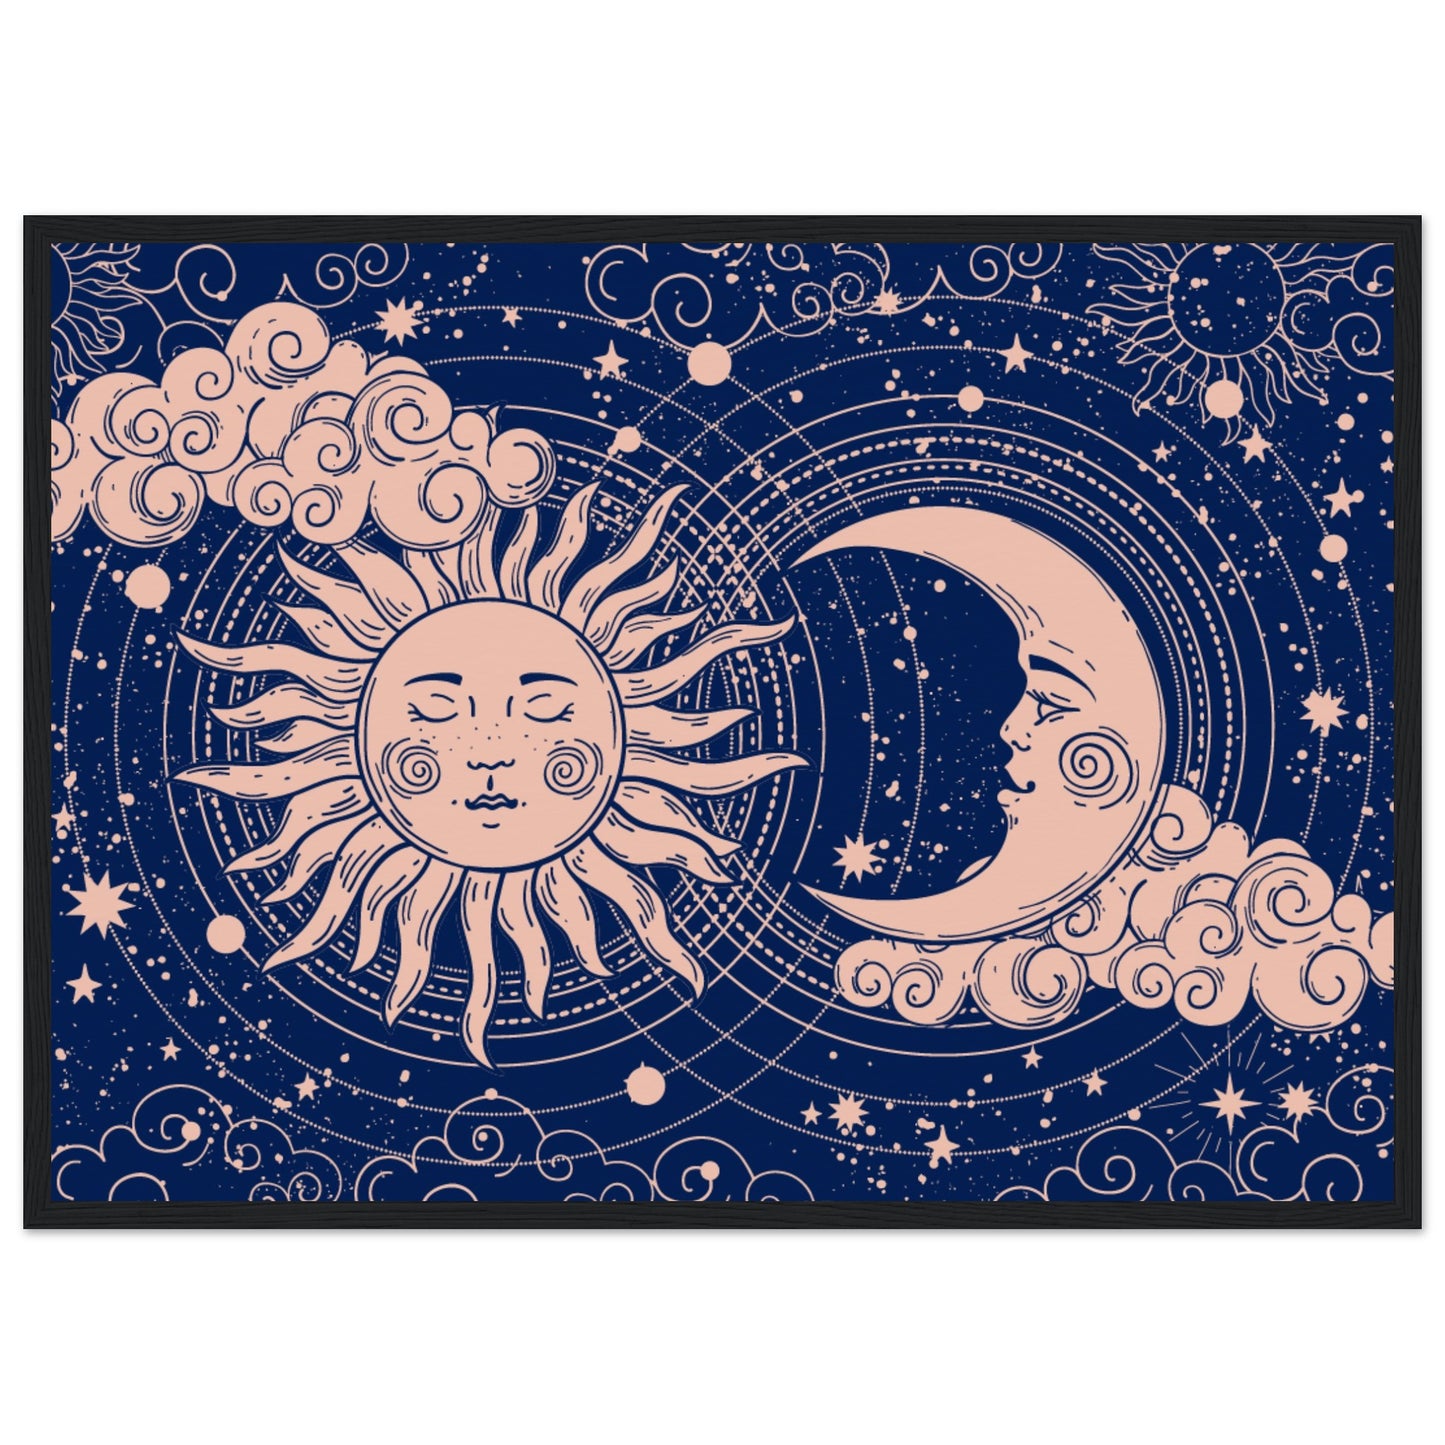 Crescent moon and sun